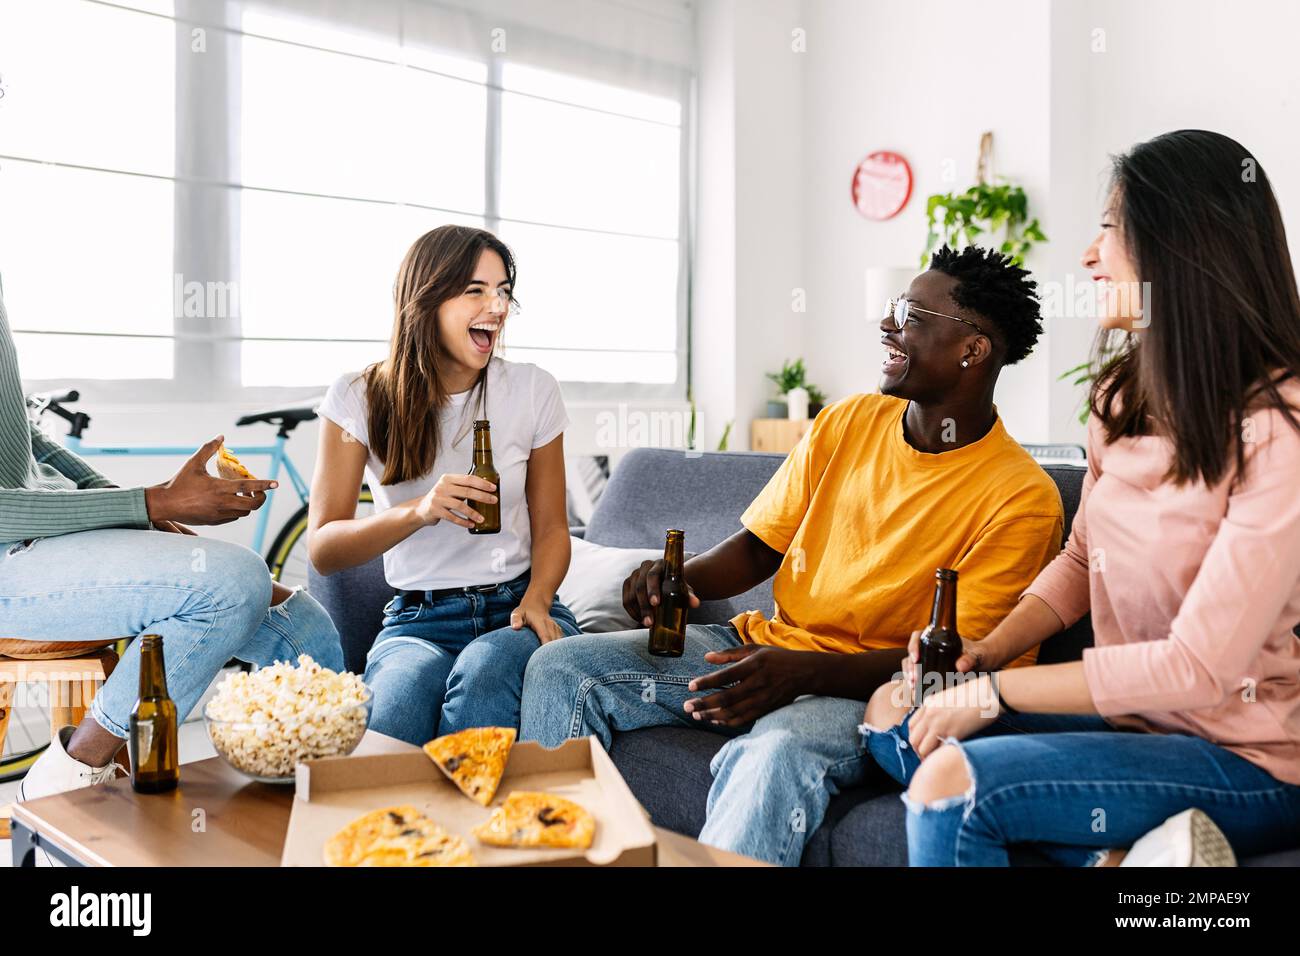 Cheerful group of young multiracial friends having fun together at home Stock Photo